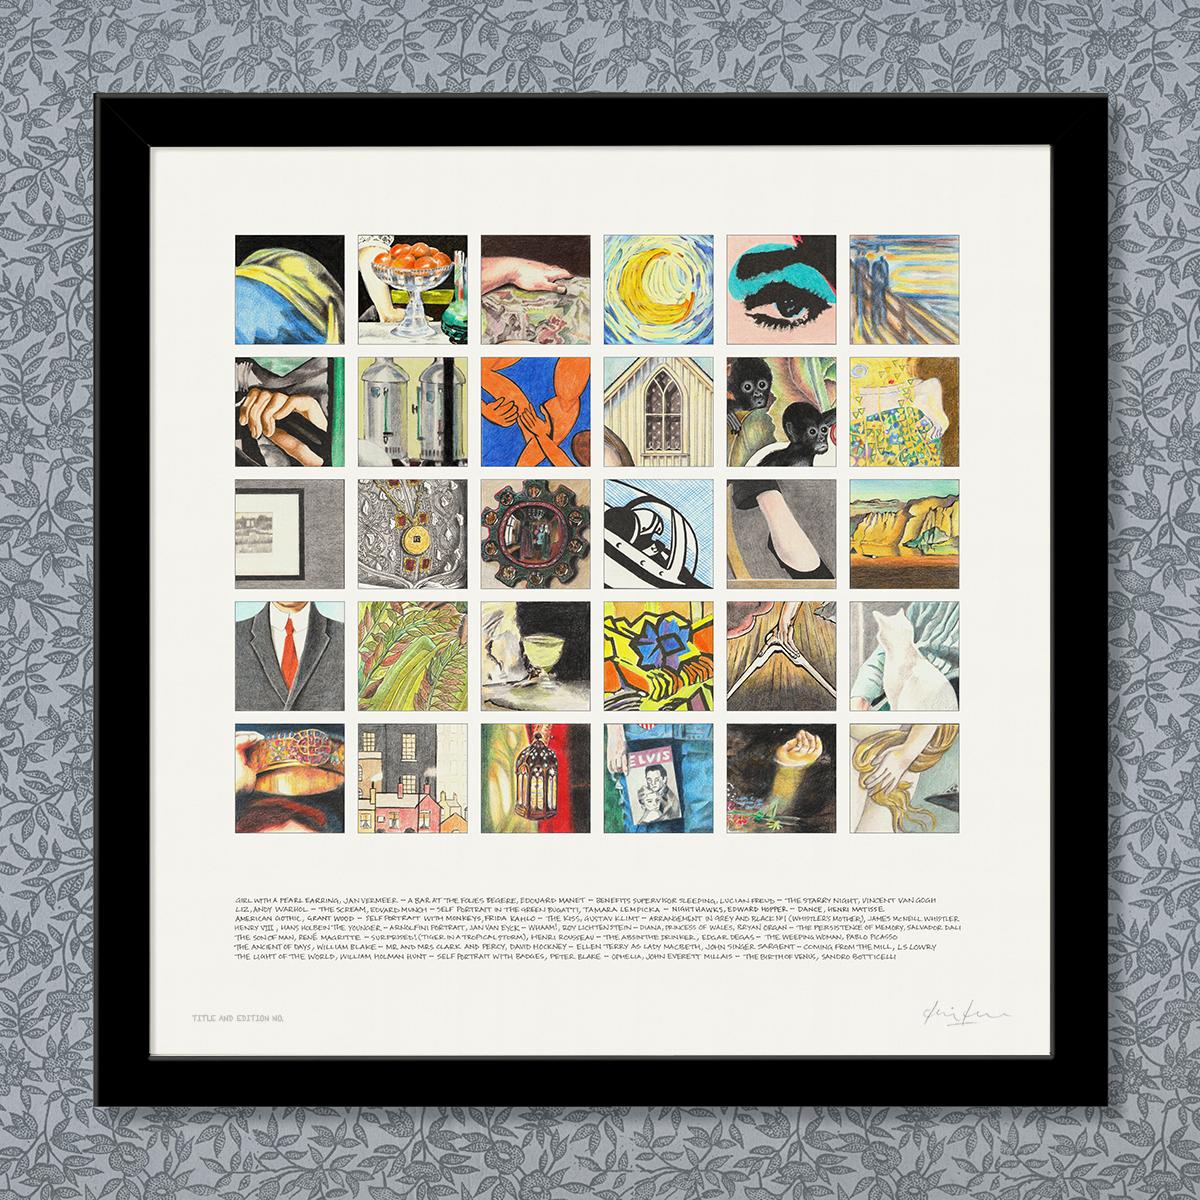 Limited edition print, a montage of drawn snippets from famous paintings, in a black frame.